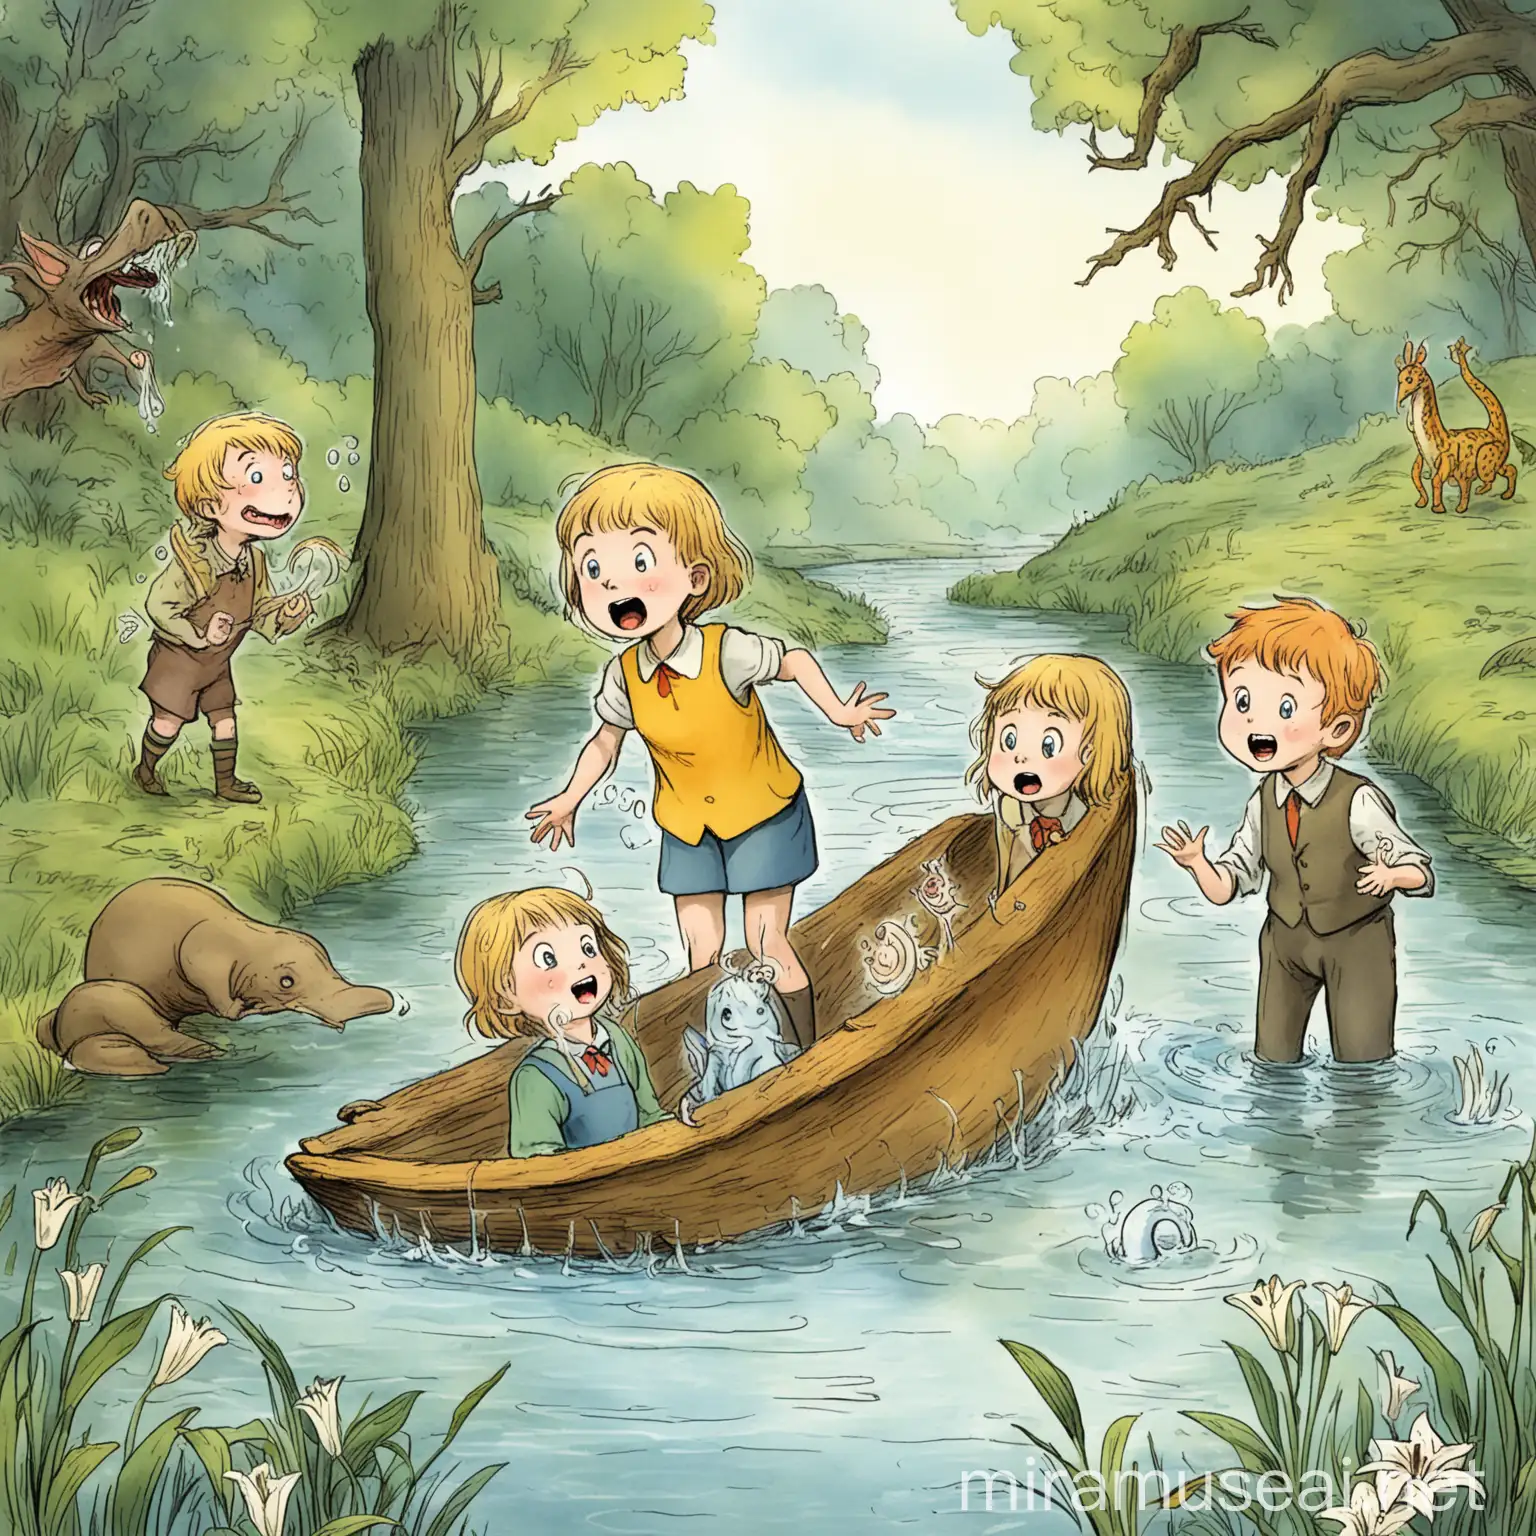 The children gulped. The river asked riddles about the fantastical creatures and strange sights they'd seen. Using their memories, Lily and Arthur solved each riddle, the river chuckling with each correct answer. Finally, with a gurgling whoosh, the water parted, letting them cross. Phew! They were closer to home, thanks to their sharp memories. 

